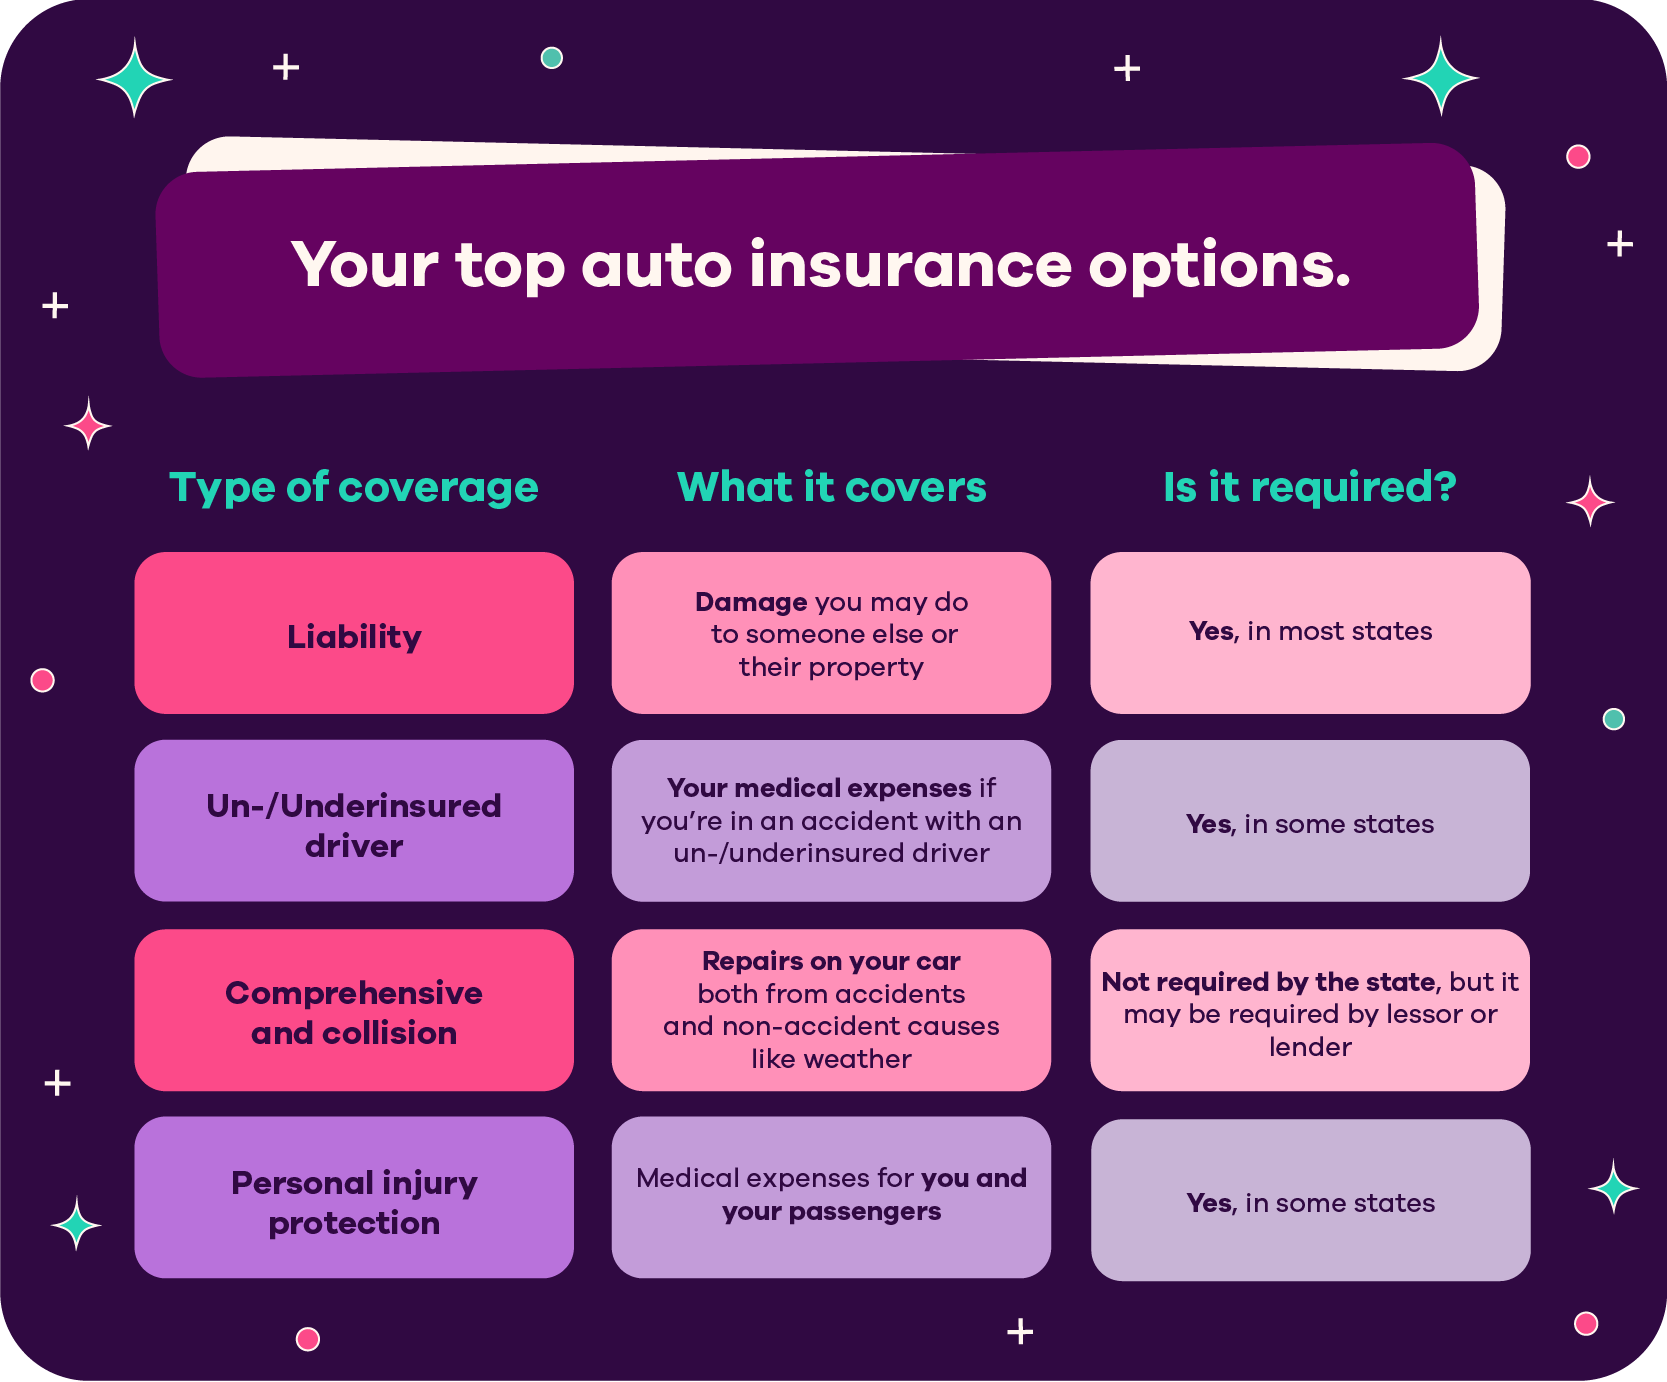 Your top auto insurance options. Liability coverage: it covers damage you may do to someone else or their property and is required in most states. Un or underinsured driver coverage: it covers your medical expenses if you're in an accident with an uninsured or underinsured driver and is required in some states. Comprehensive and collision coverage: it covers repairs on your car both from accidents and non-accident causes like weather and is not required by the state, but it may be required by a lessor or lender. Personal injury protection: it covers medical expenses for you and your passengers and is required in some states.